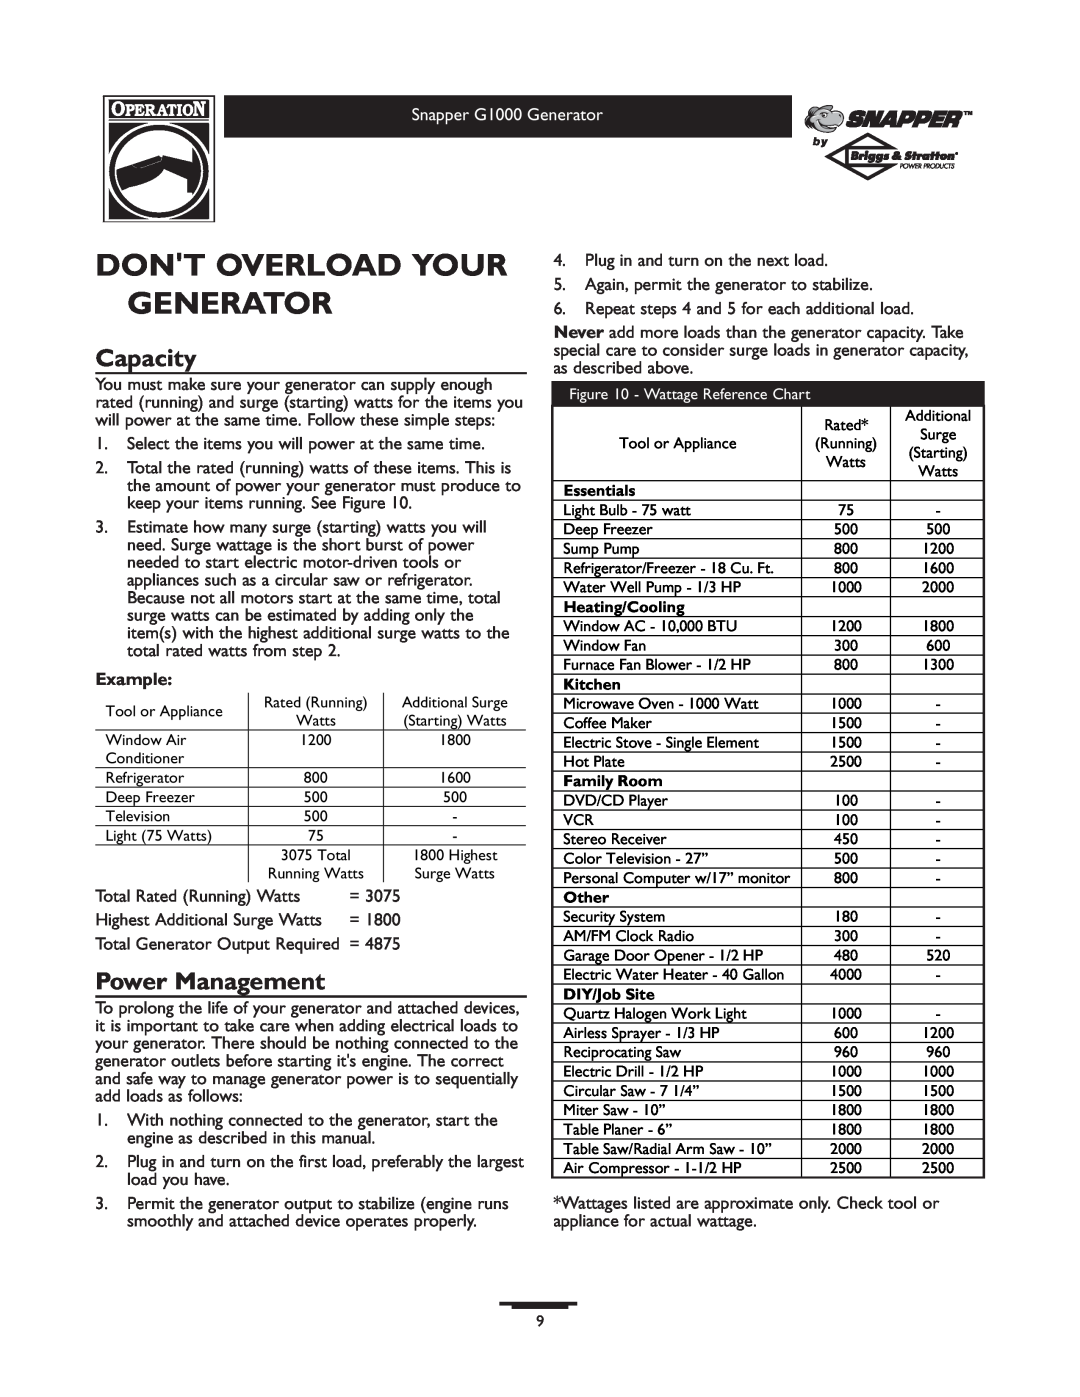 Snapper 1666-0 owner manual Dont Overload Your Generator, Capacity, Power Management 